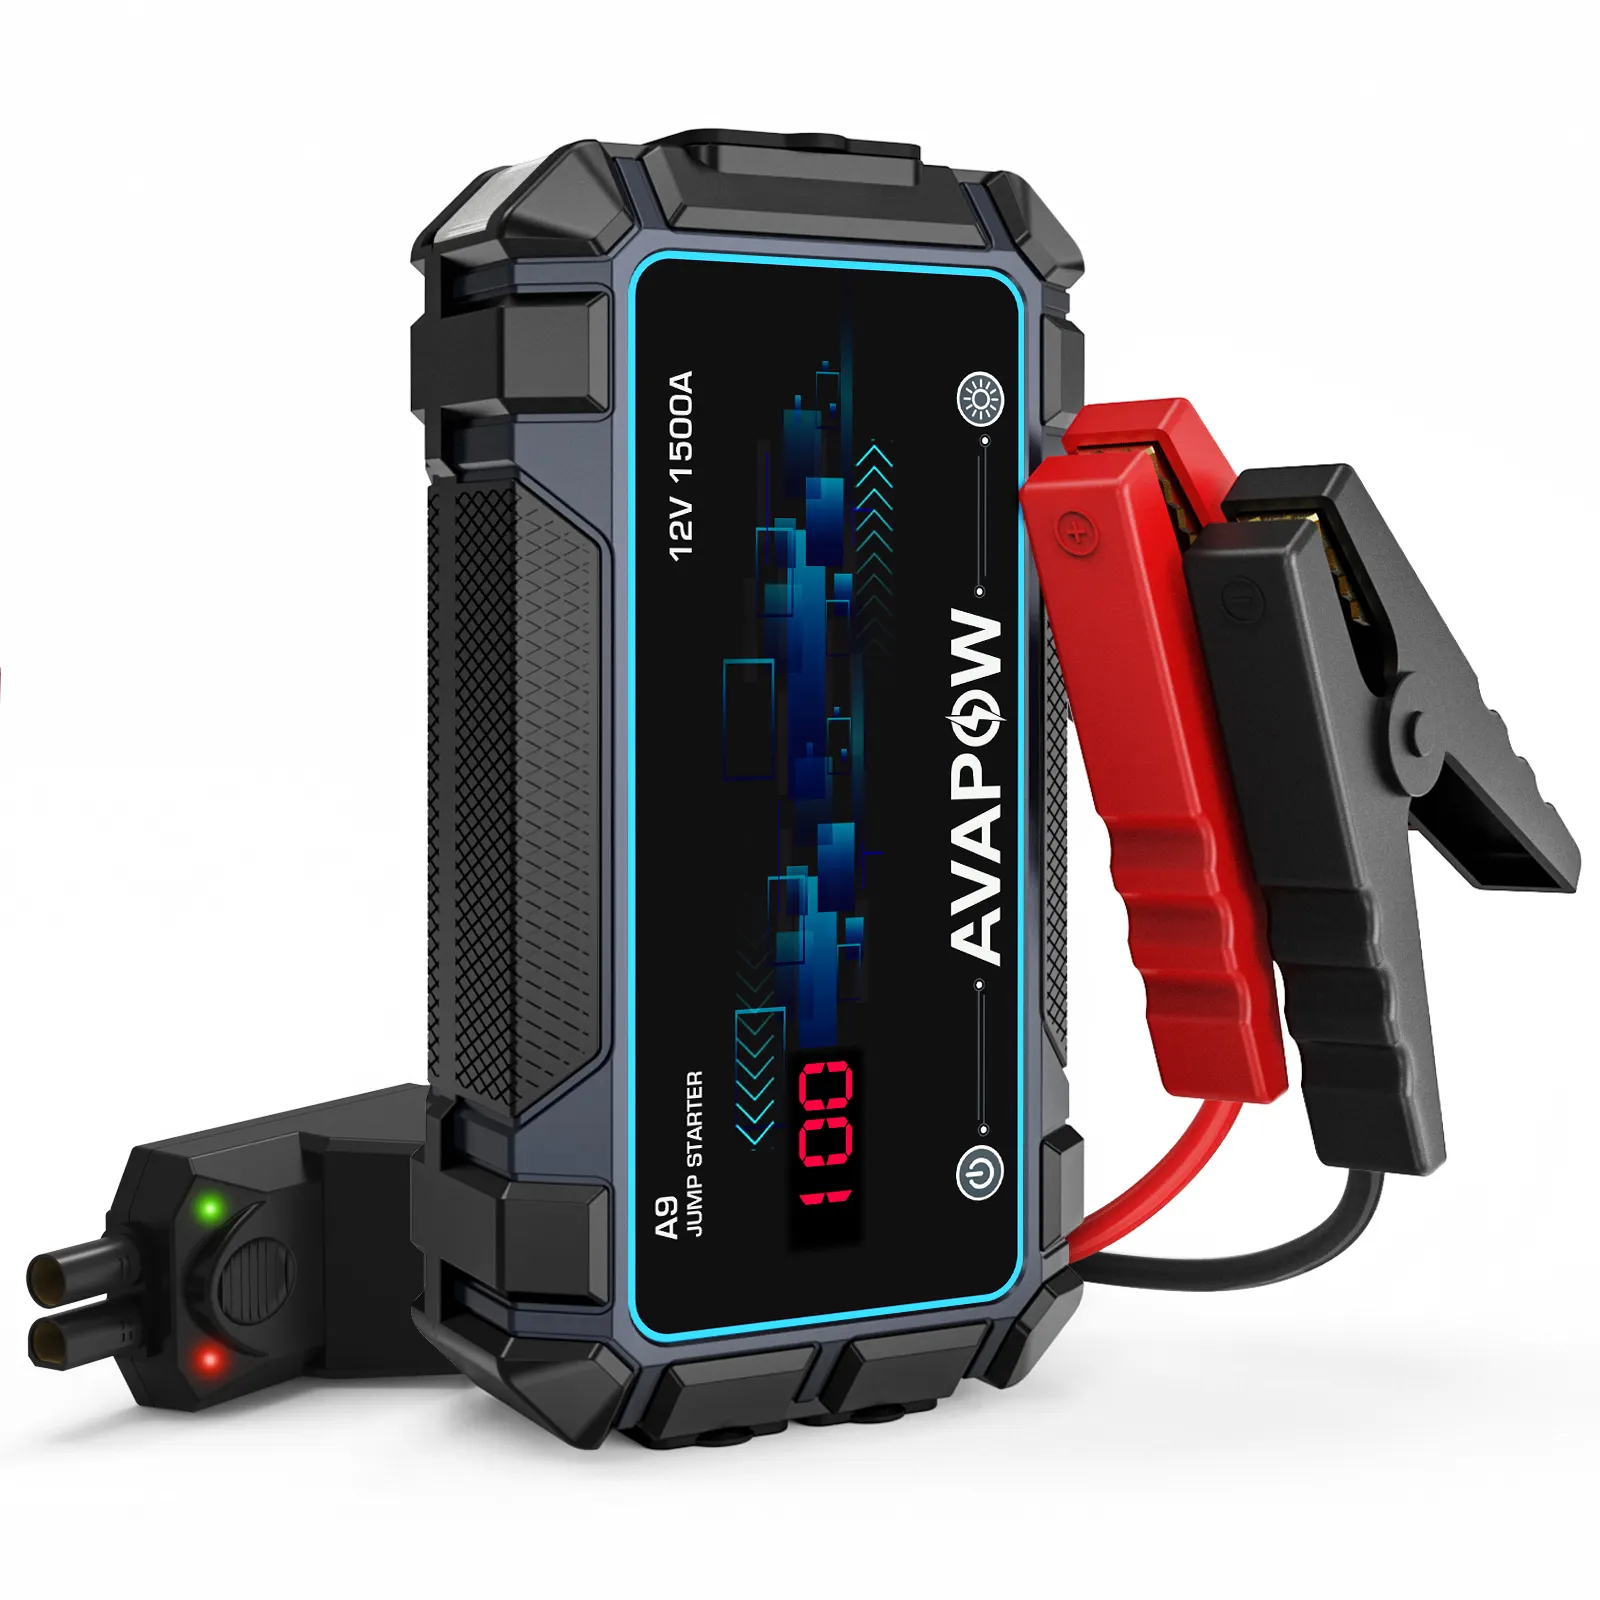 AVAPOW 8000mAh Battery Pack 1500A Car Jump Starter 5L Gasoline / 3.2L Giesel Engine Battery Jumper QC Quick Charge Power Bank